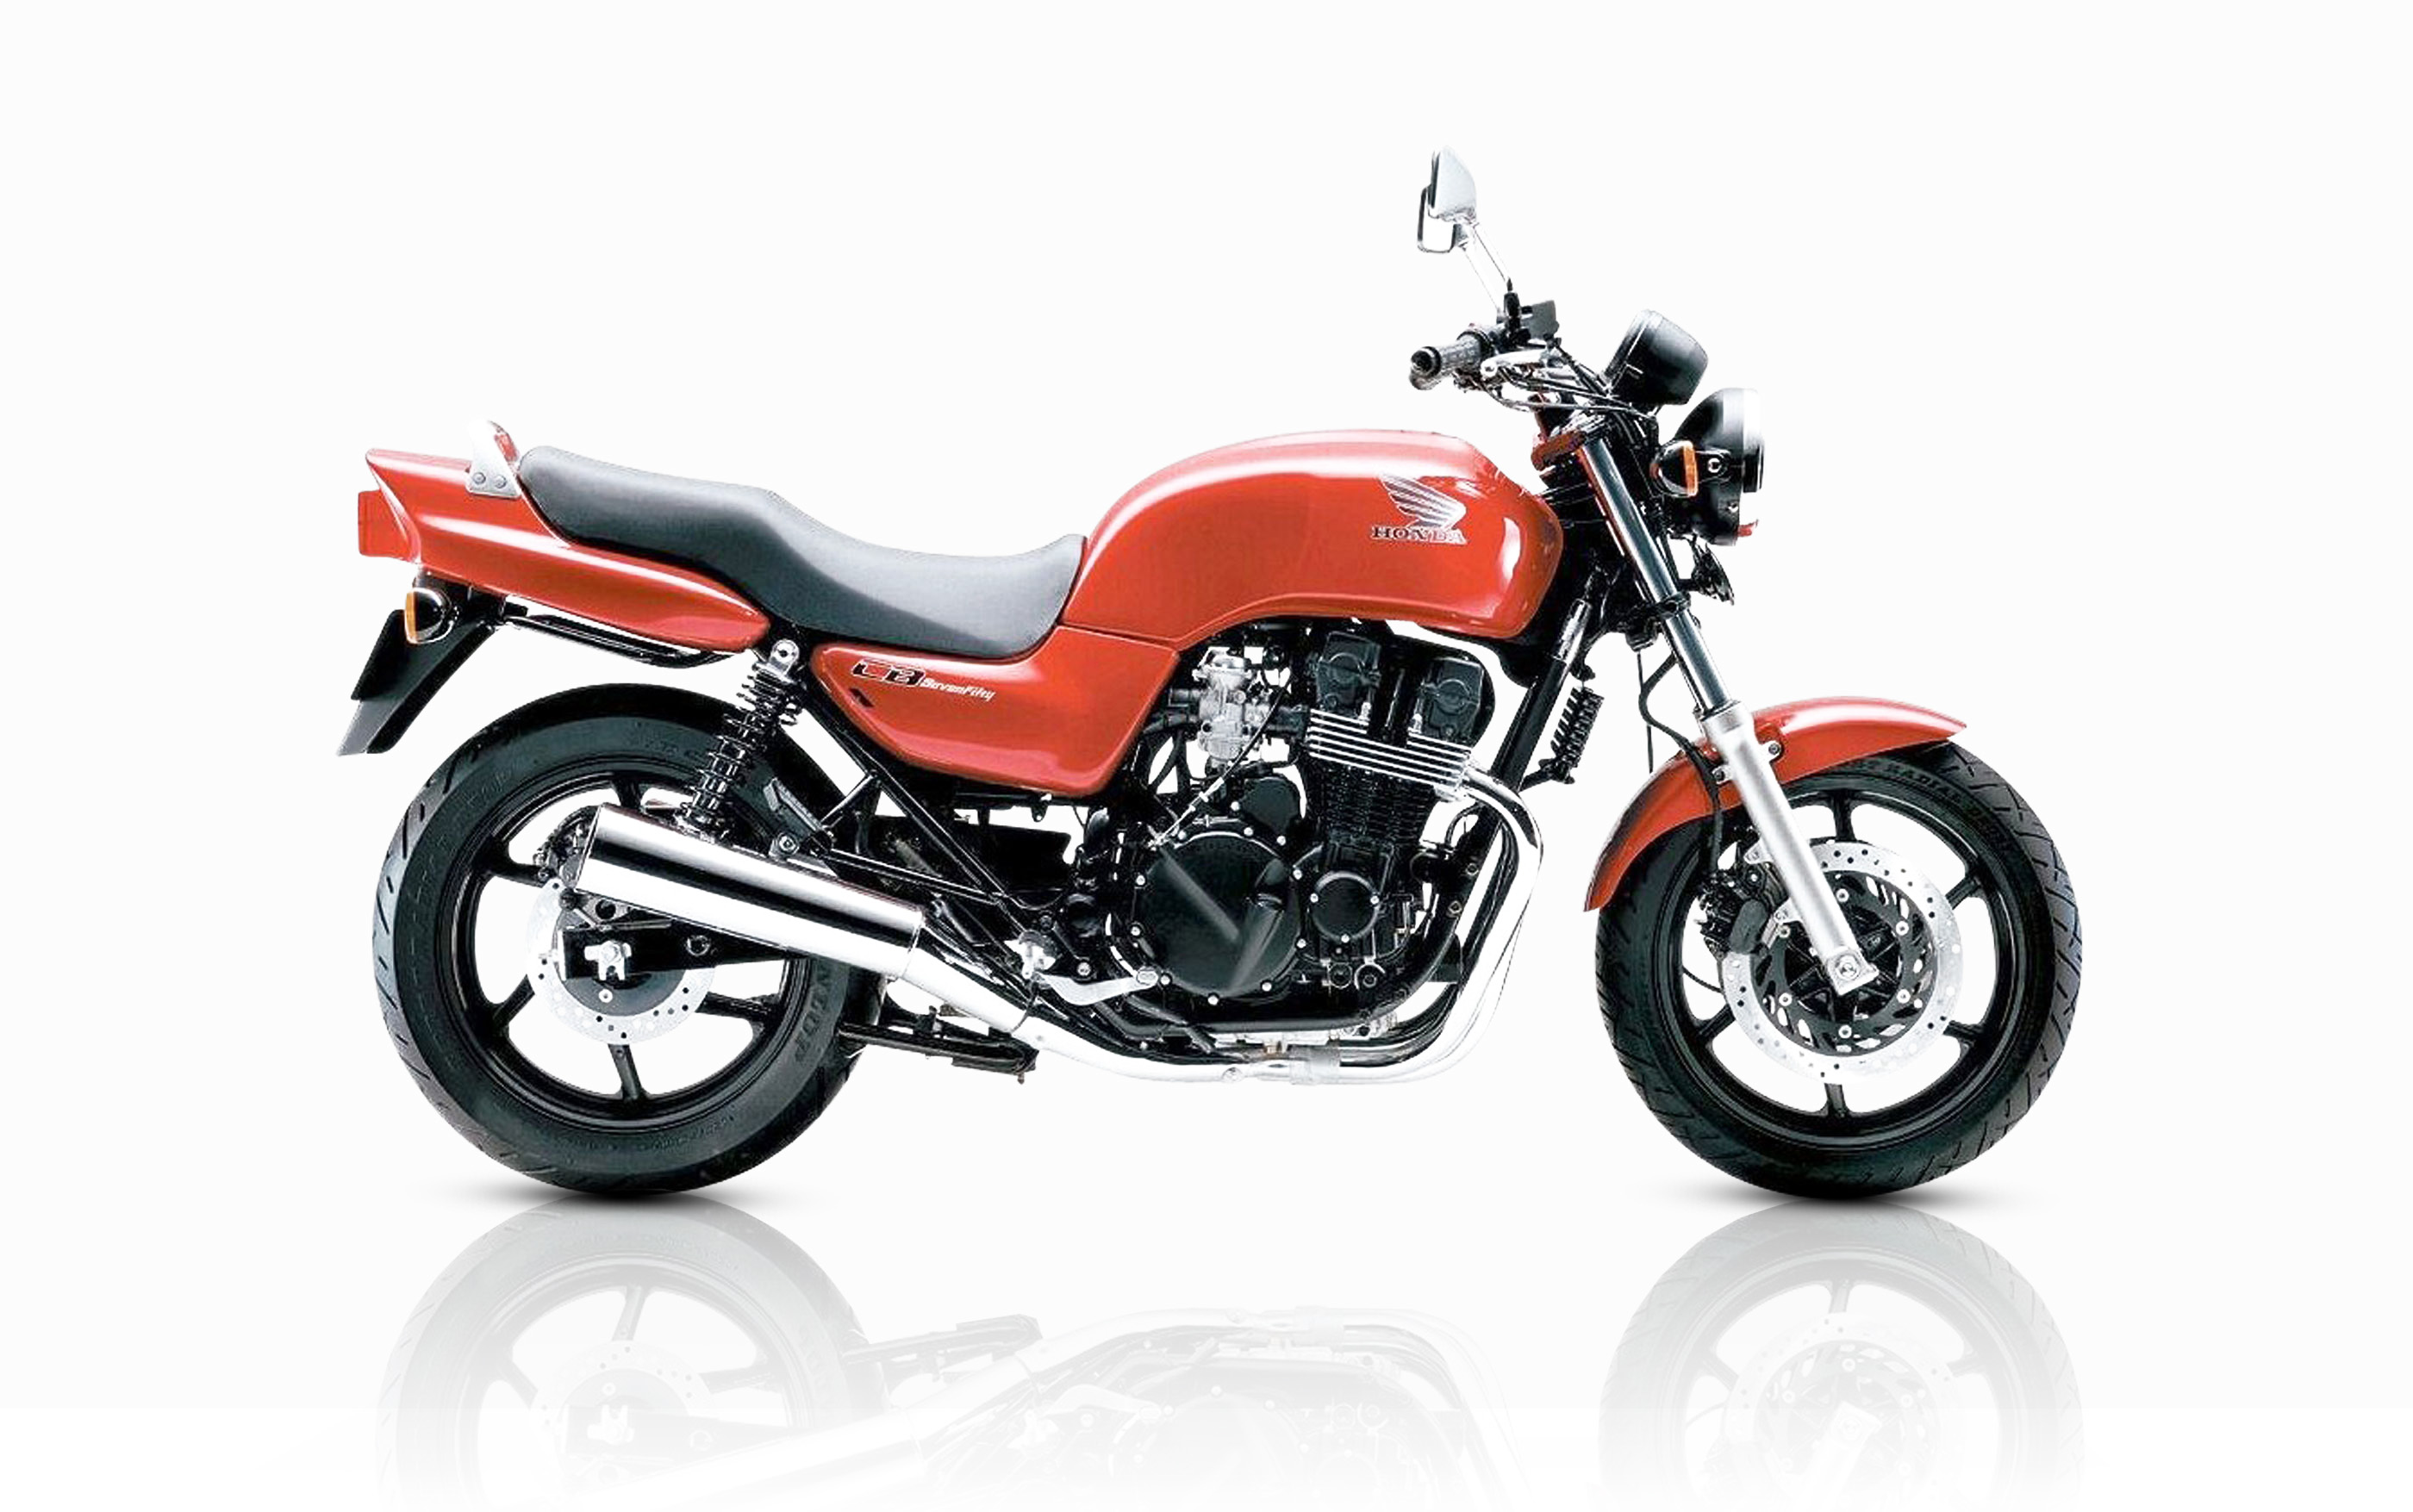 Spare parts and accessories for HONDA CBX 750 F